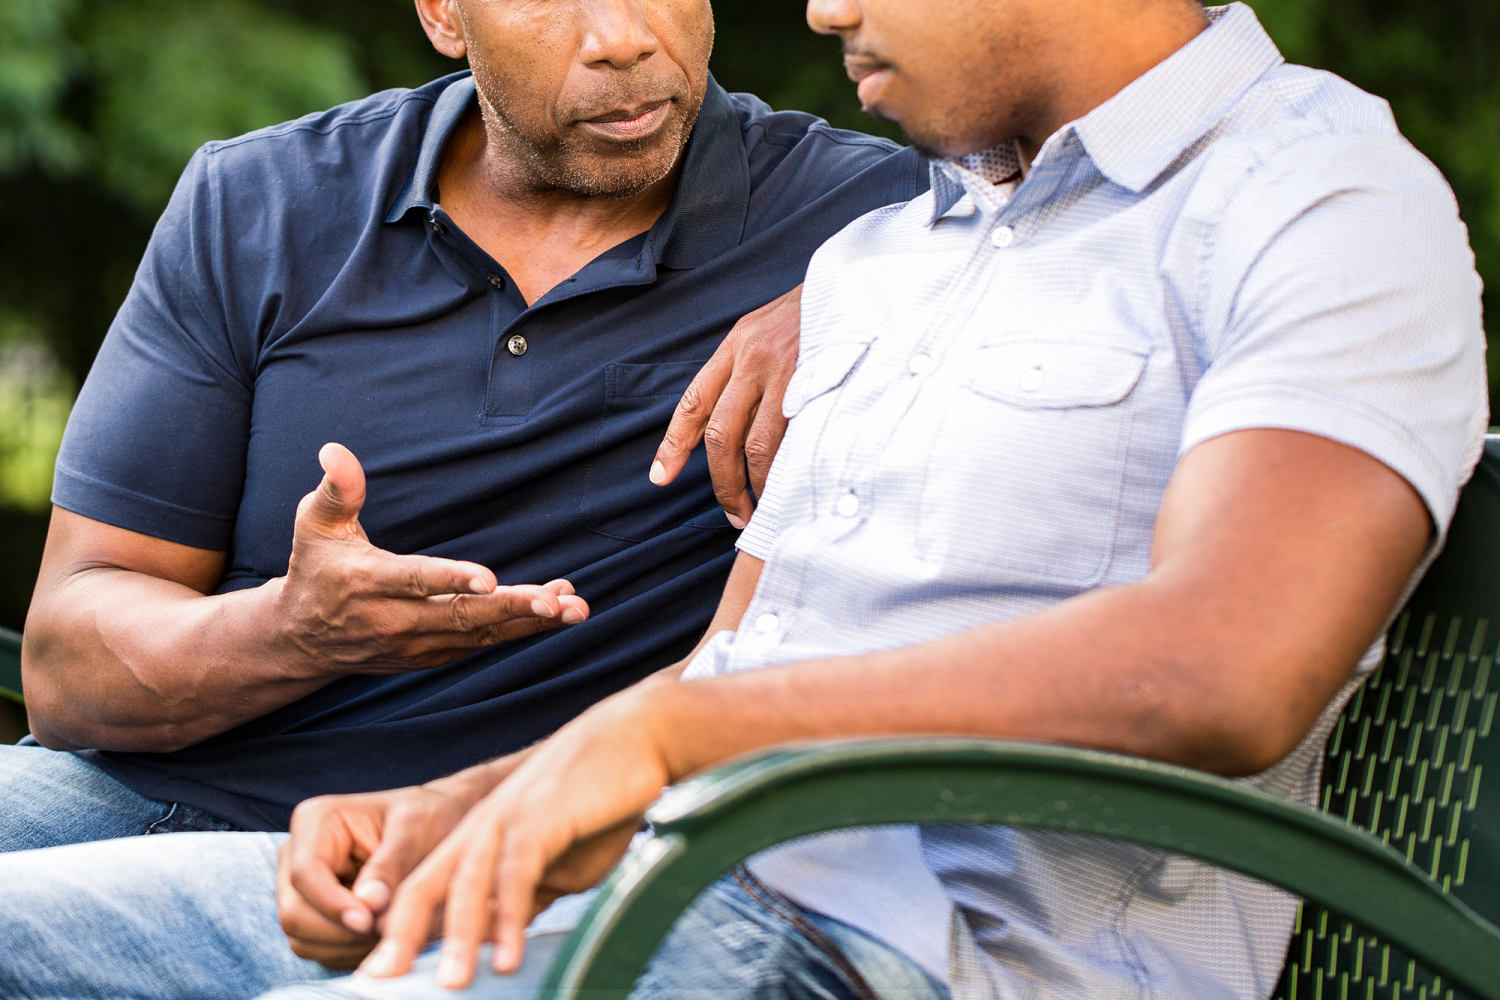 Dads often underestimate when teen sons are sexually active, delaying safe sex advice